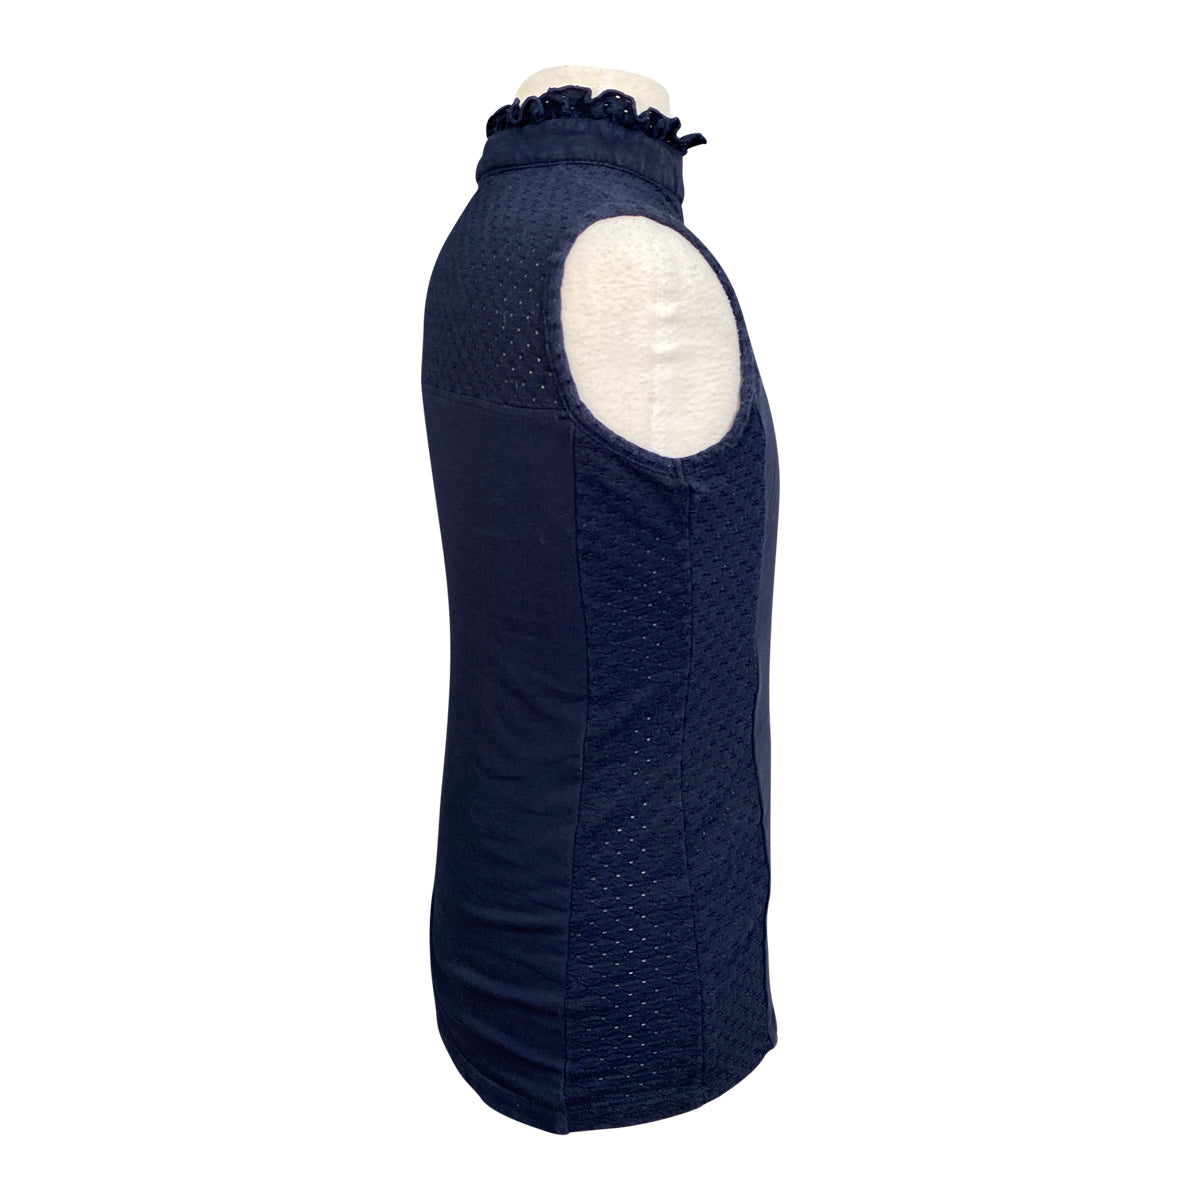 Imperial Riding Sleeveless Riding Top in Navy